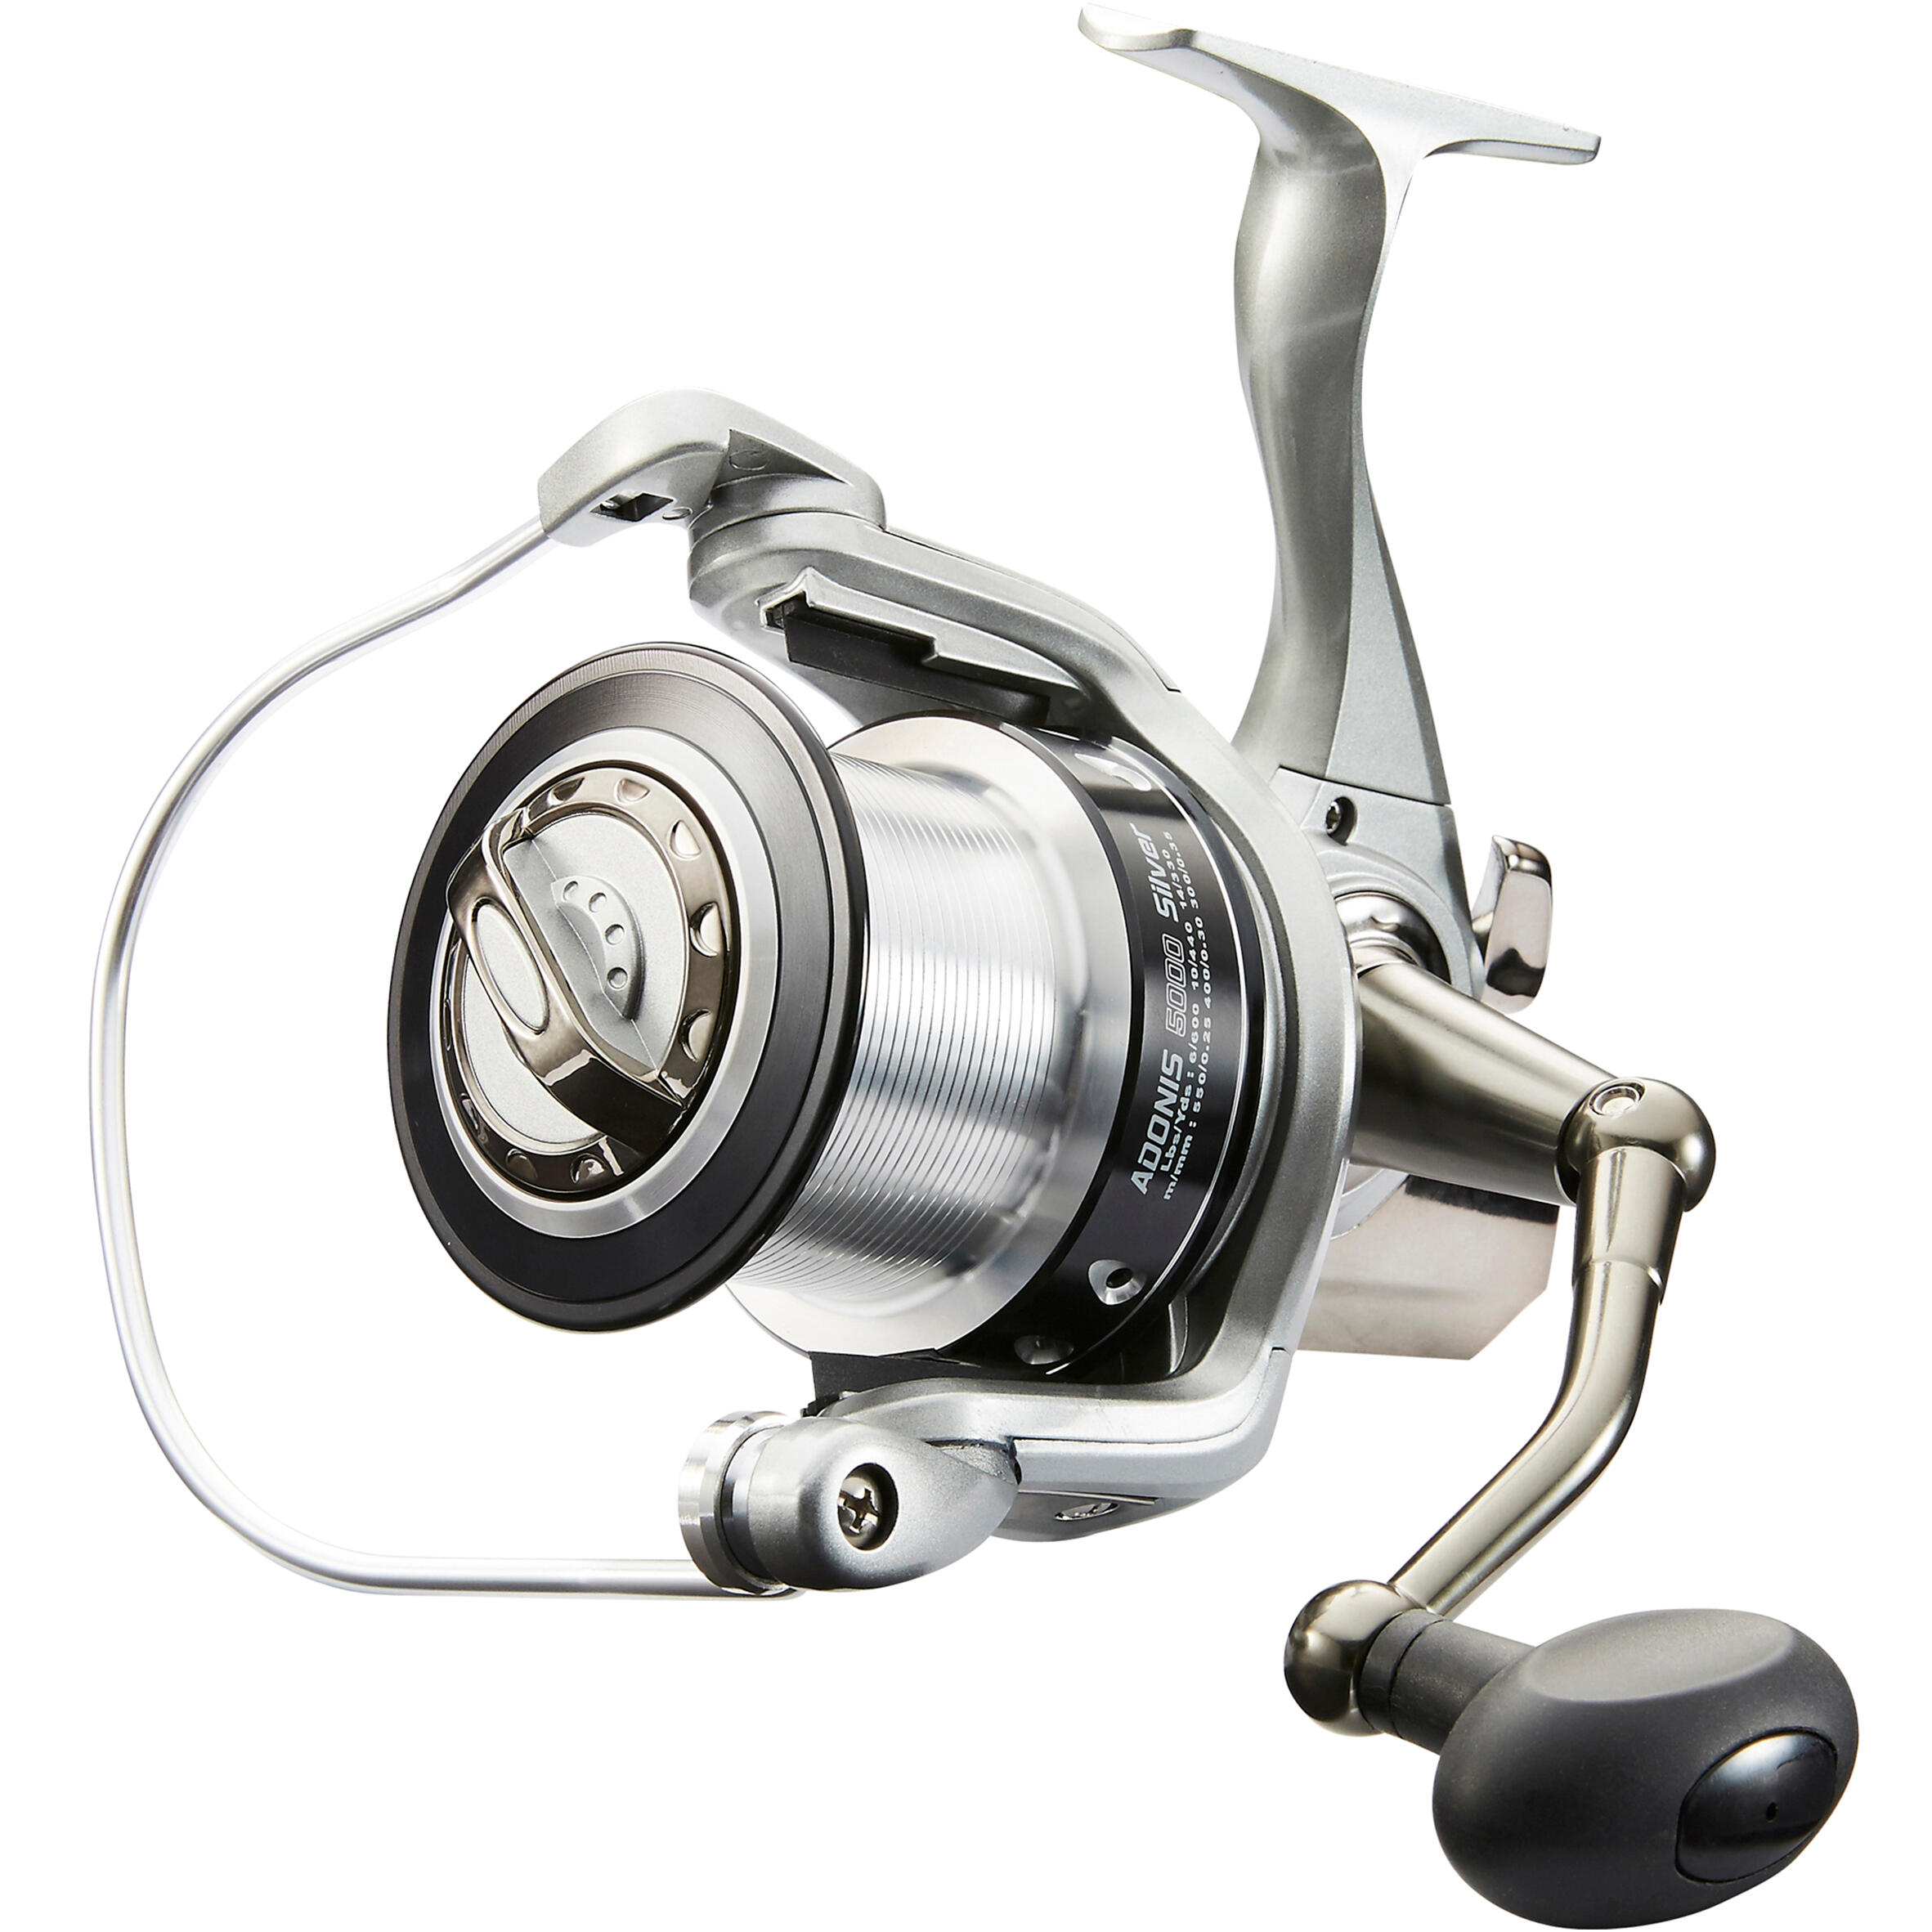 Mulinetă Adonis 5000 SILVER Pescuit marin surfcasting